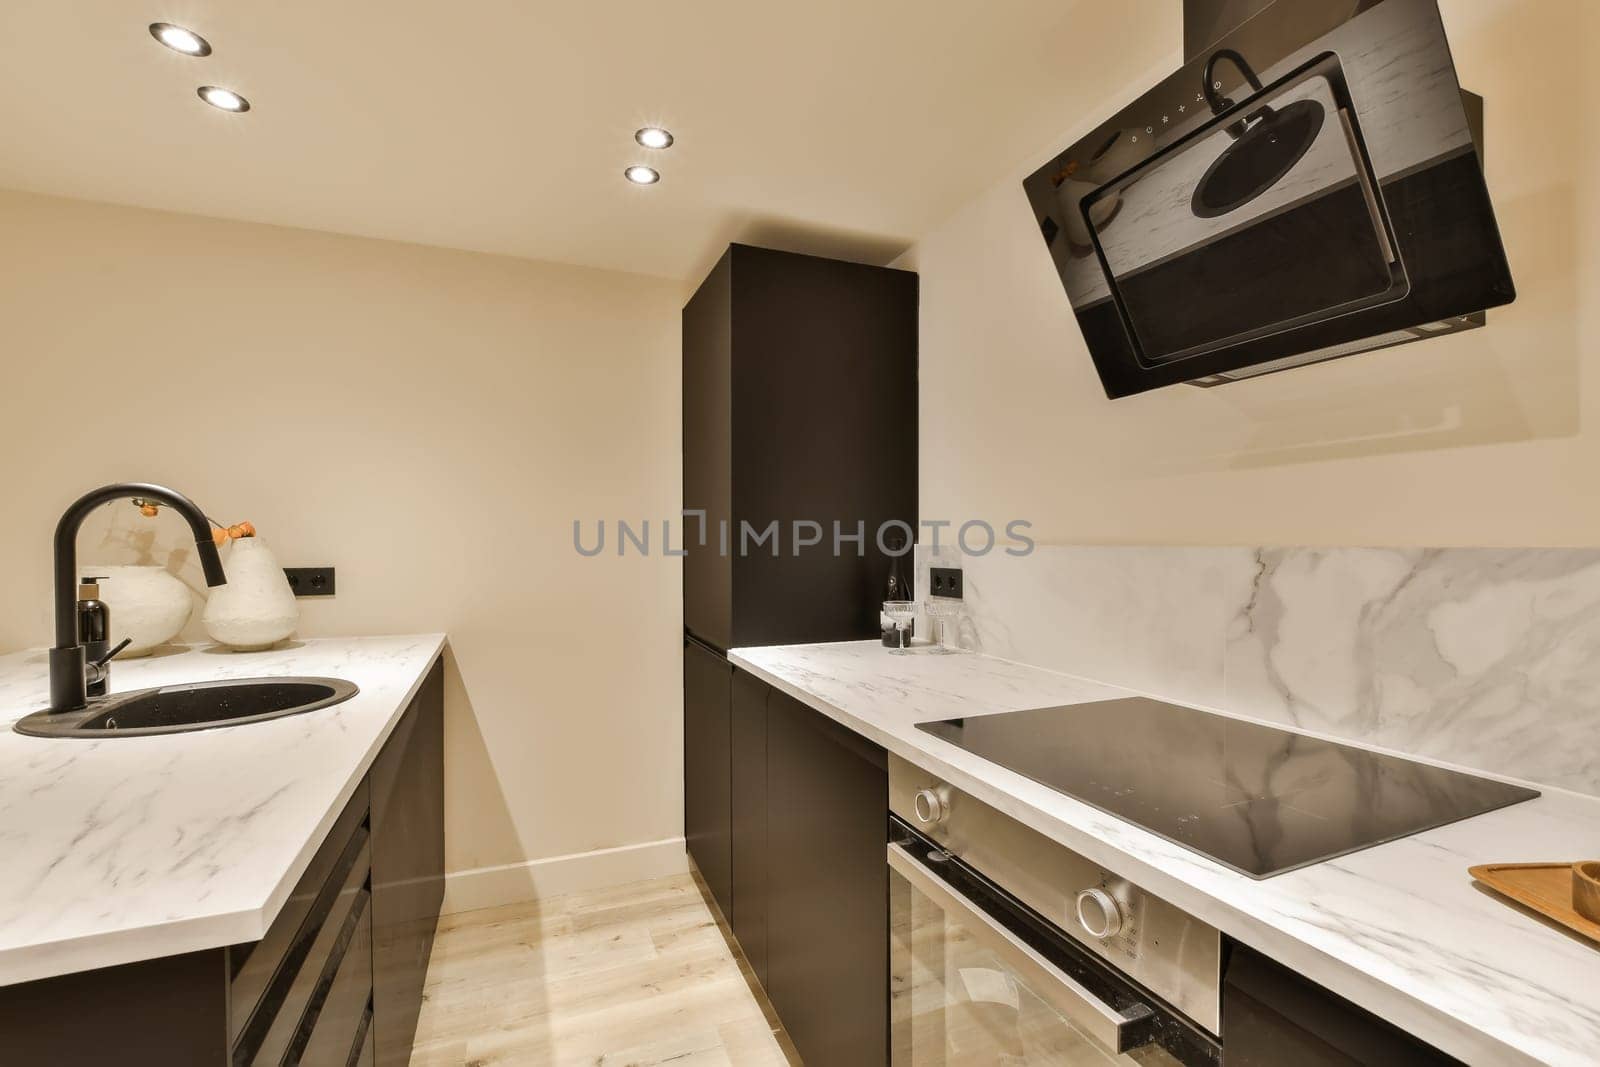 a modern kitchen with marble counter tops and black appliances on the wall mounted tv above the sink is also visible